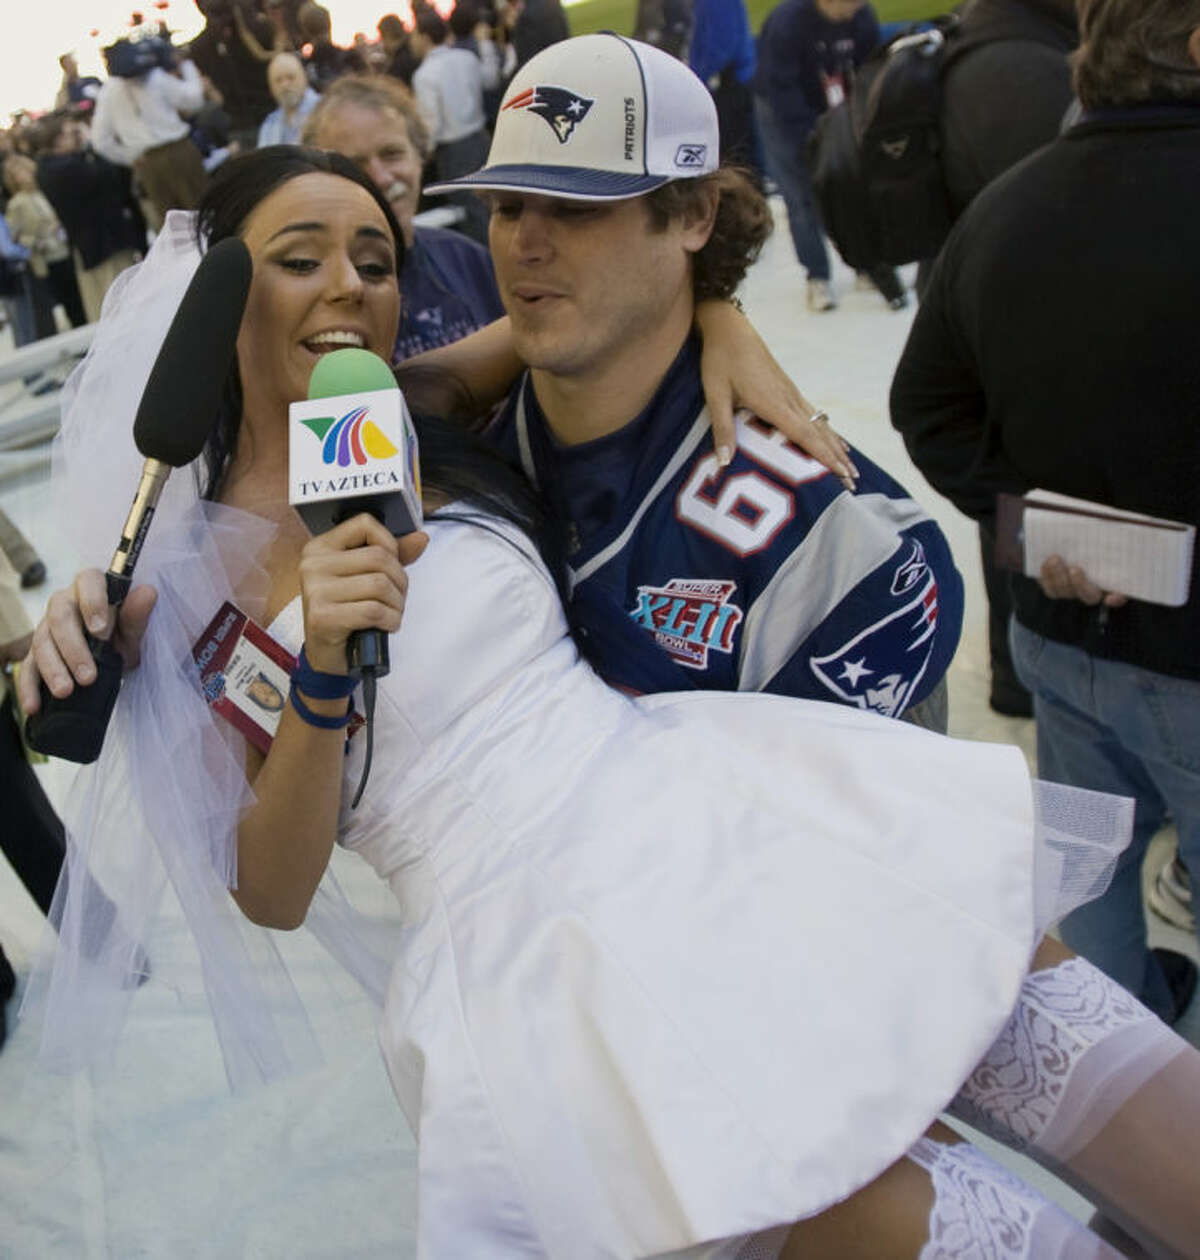 File-This Jan. 29, 2008 file photo shows Ines Gomez Mont, a reporter from TV Azteca in Mexico, wearing a wedding dress as she is carried by New England Patriots center Lonie Paxton while interviewing him during media day for the Super Bowl XLII football game in Glendale, Ariz. Once a serious endeavor, media day is now a forum for credentialed "media" such as Mont. The entertainment reporter for Mexico's TV Azteca showed up in Glendale, Ariz., wearing a scanty white wedding dress and towering red pumps. She spent the next two hours trying to persuade someone, anyone, to accept her marriage proposal. (AP Photo/The Arizona Republic, Michael Chow, File)